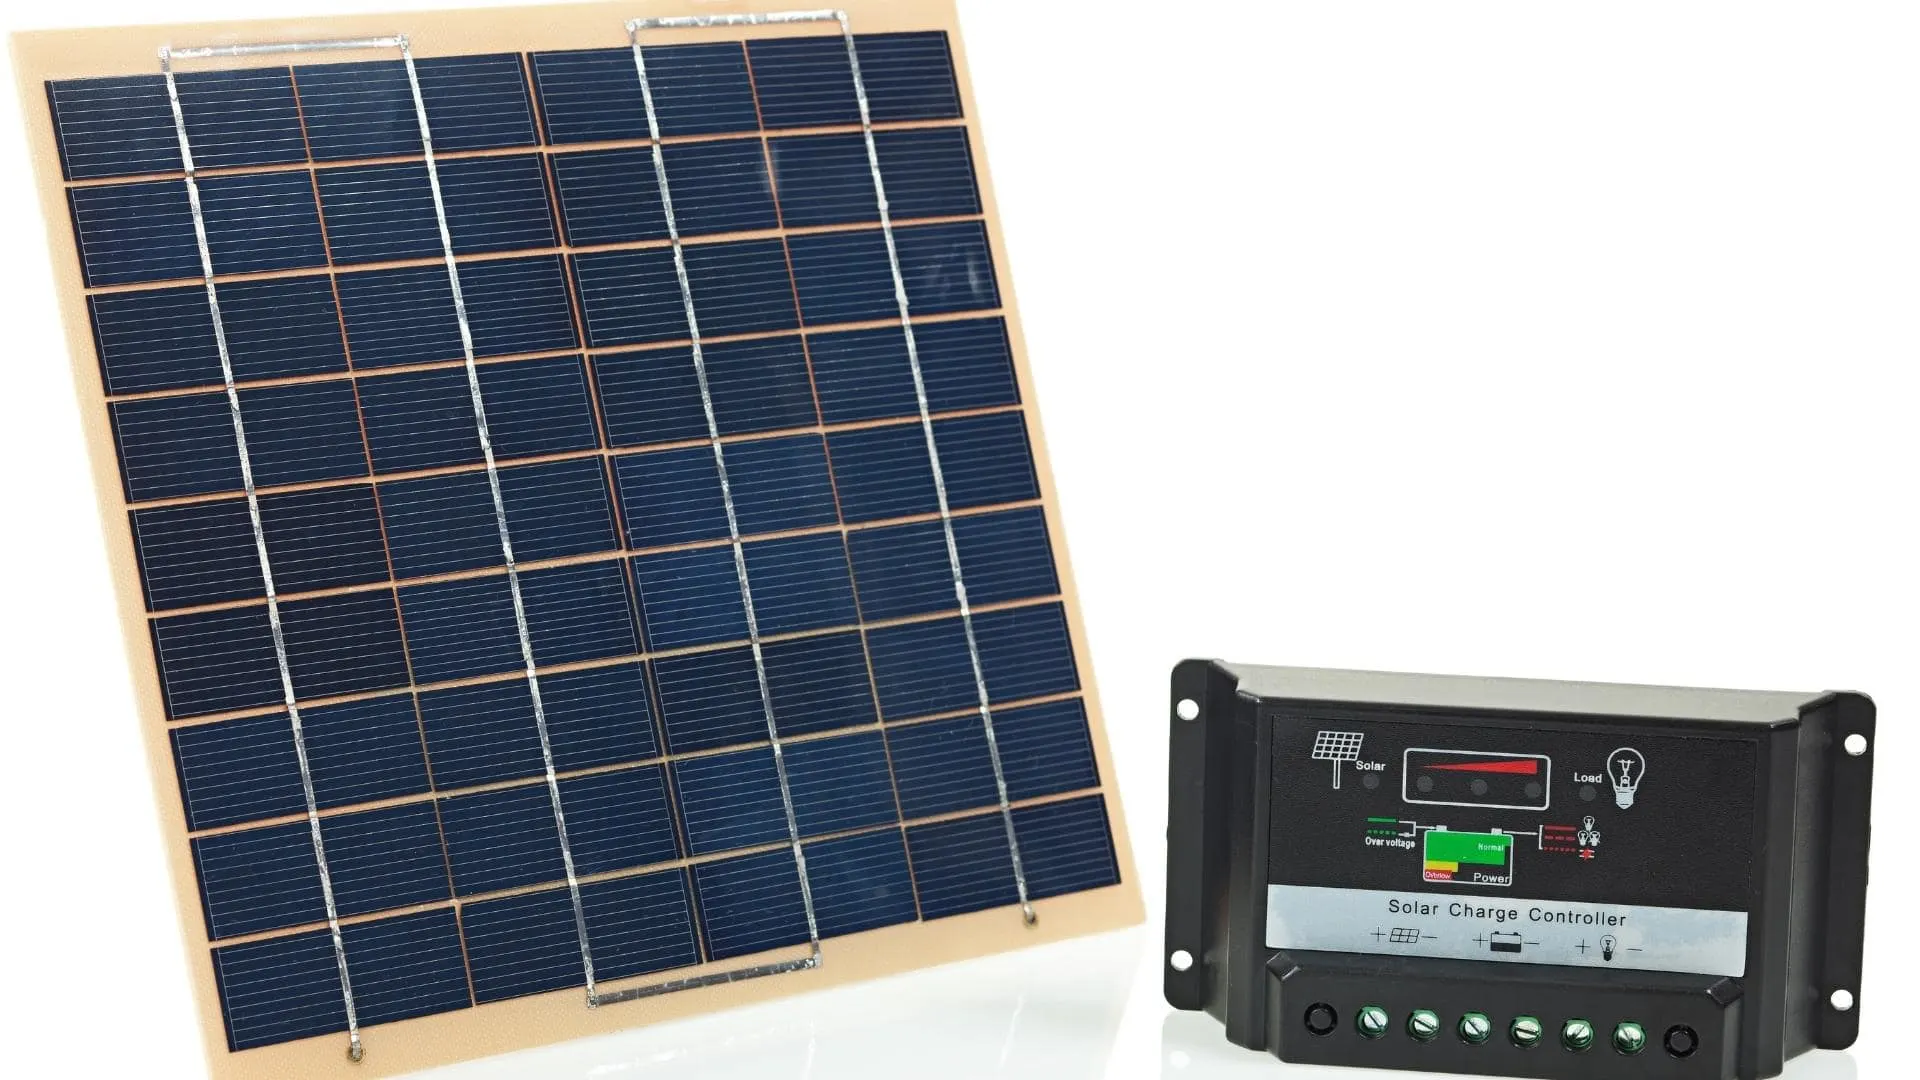 The solar panel and charge controller work together.